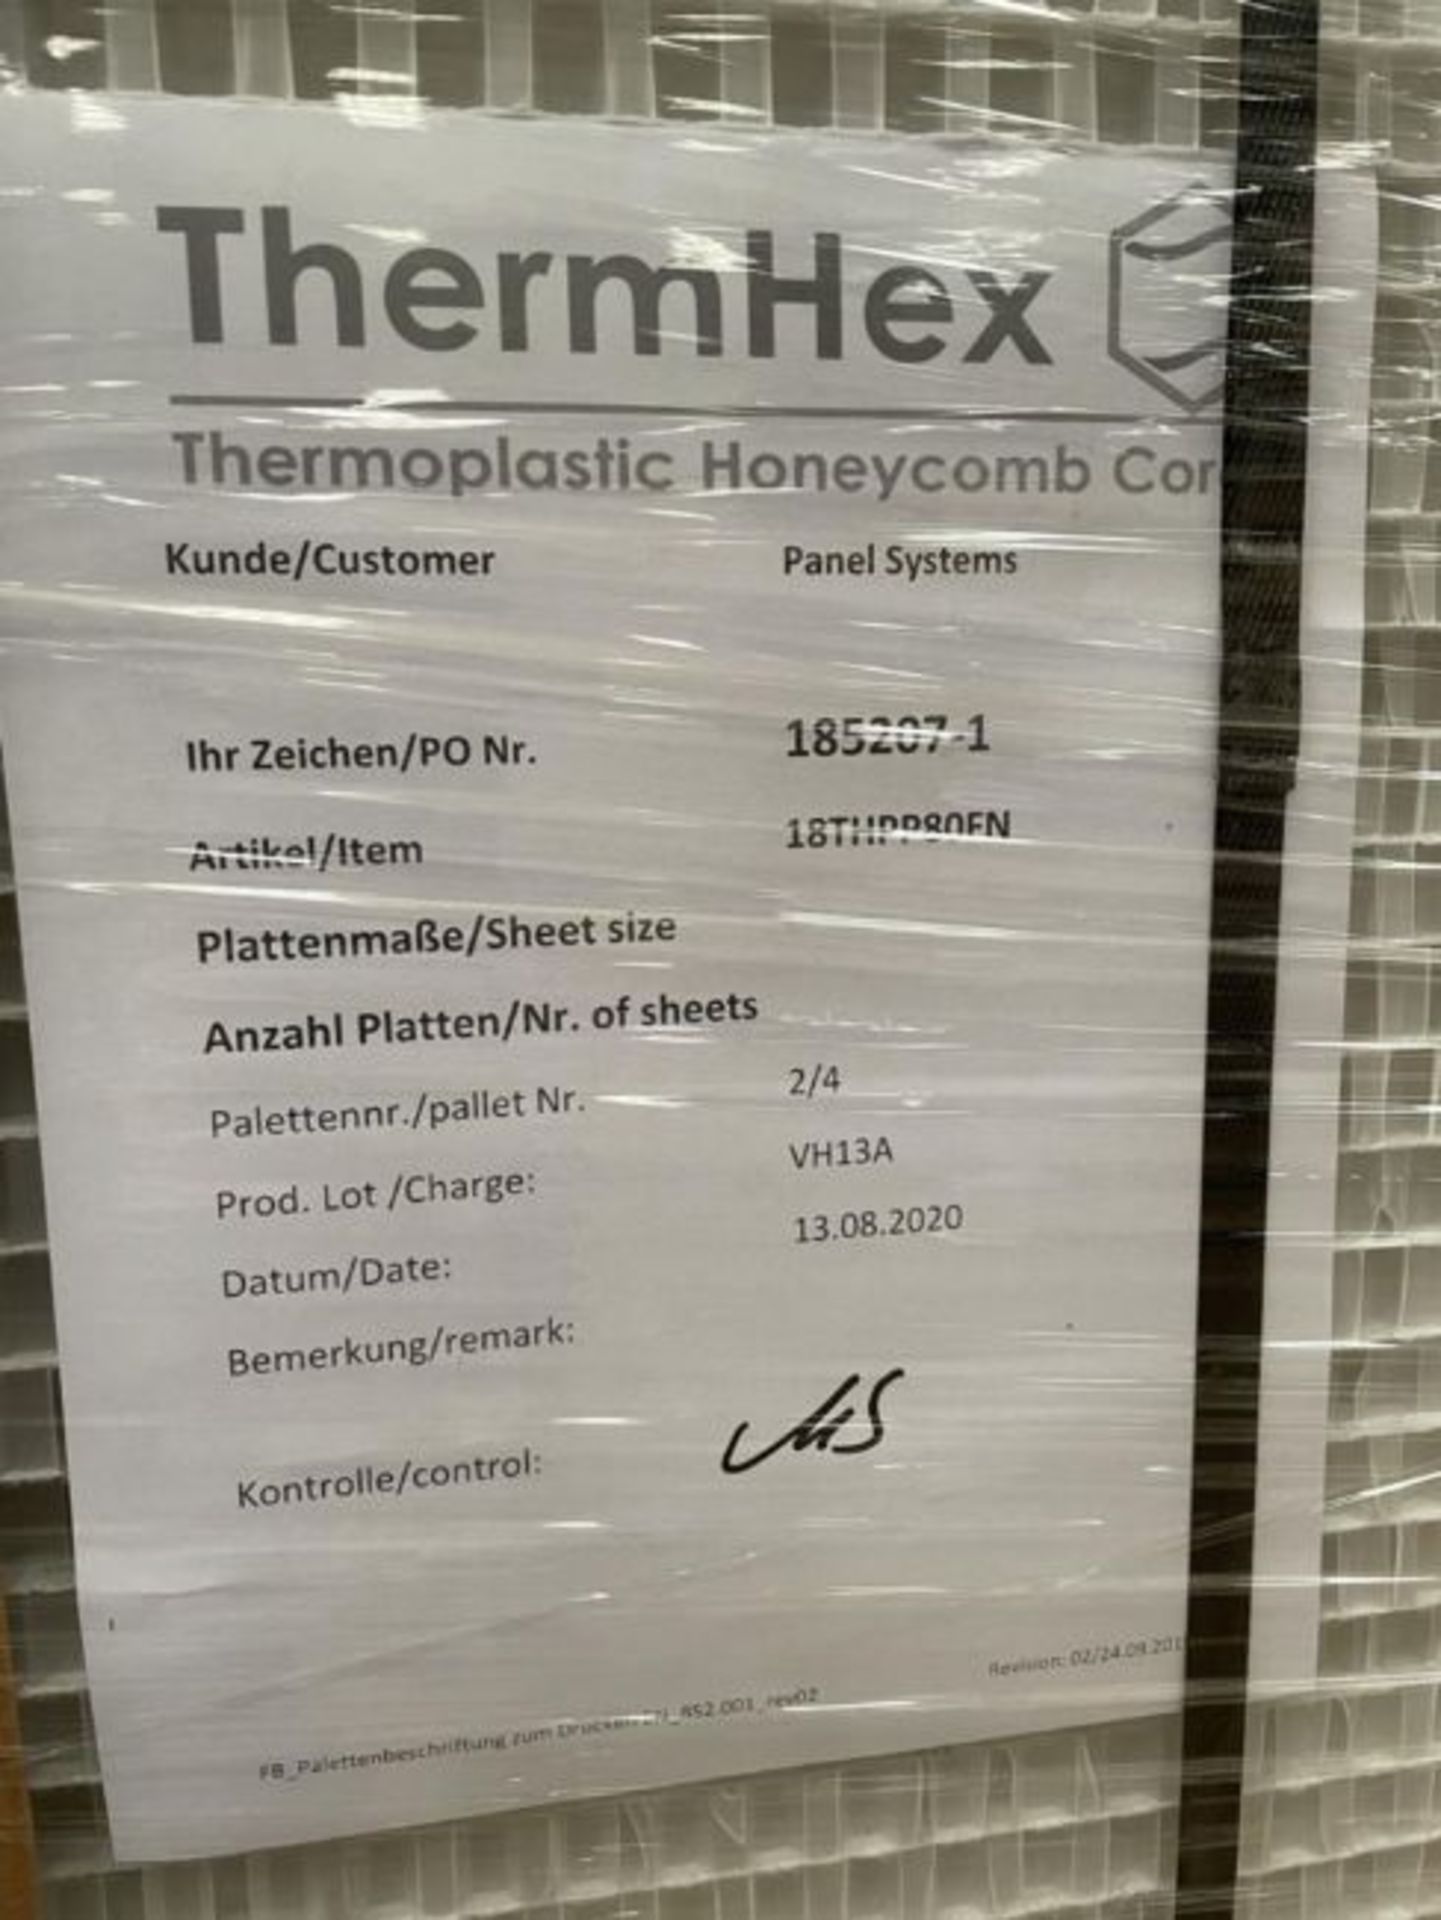 100 x ThermHex Thermoplastic Honeycomb Core Panels - Size: 693 x 1210 x 20mm - New Stock - Lightweig - Image 9 of 10